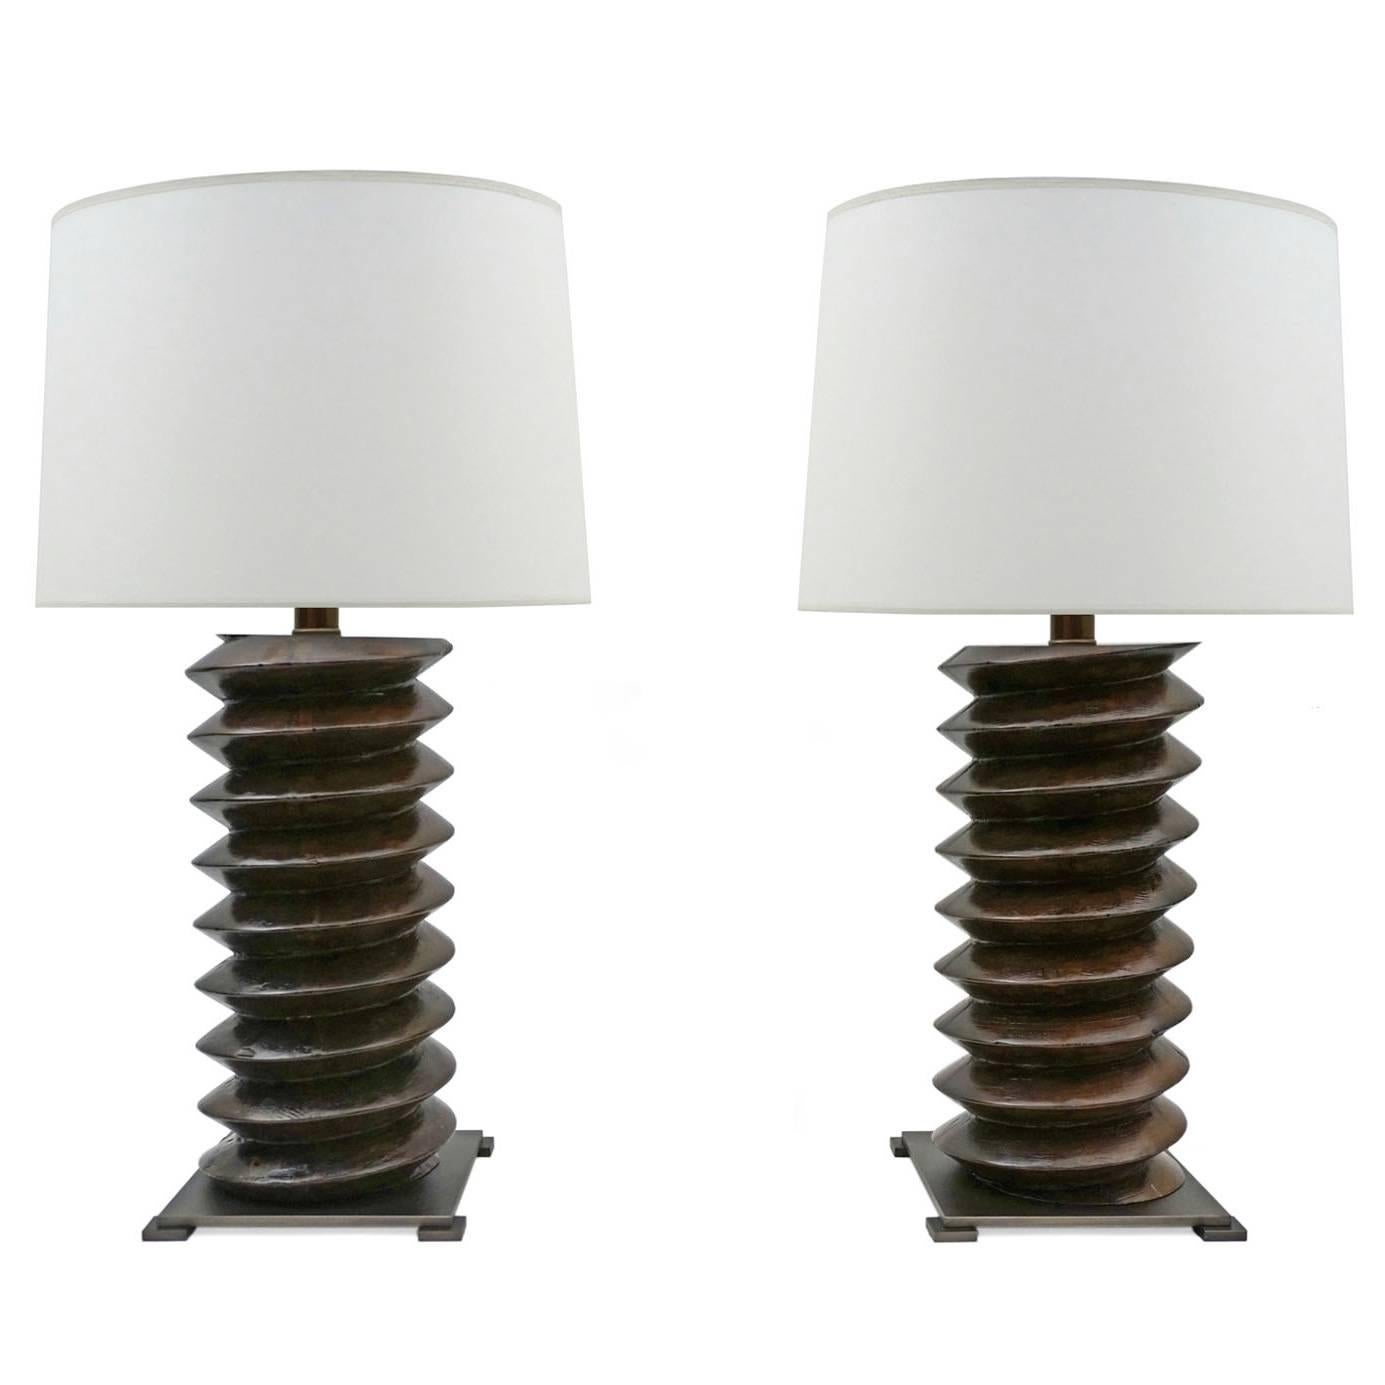 Pair of 19th Century Twisted Wood Table Lamps, France